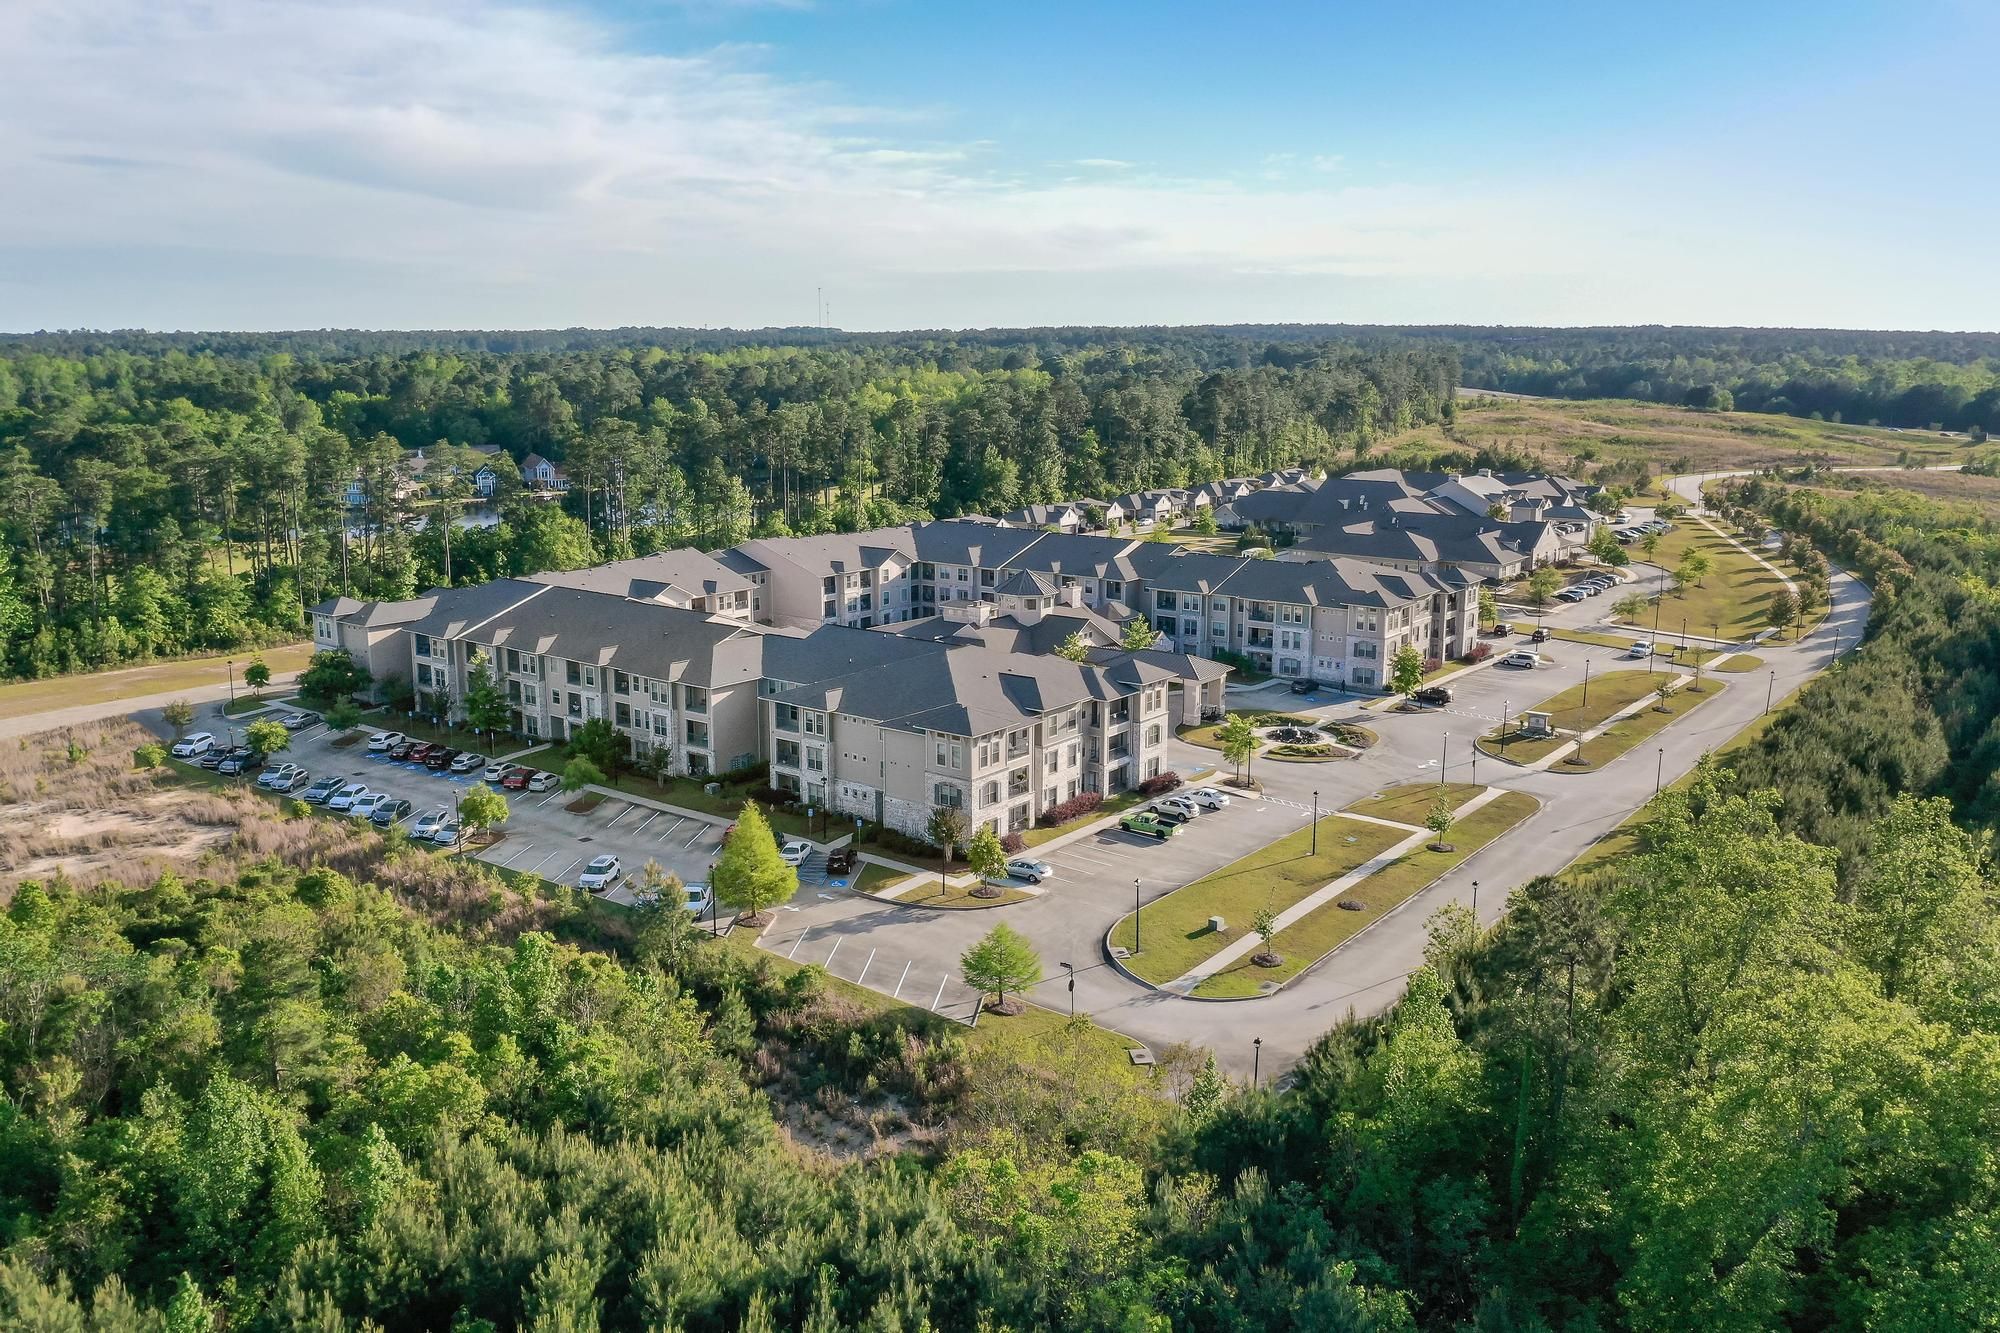 The Claiborne at Hattiesburg aerial view of community showing wooded setting